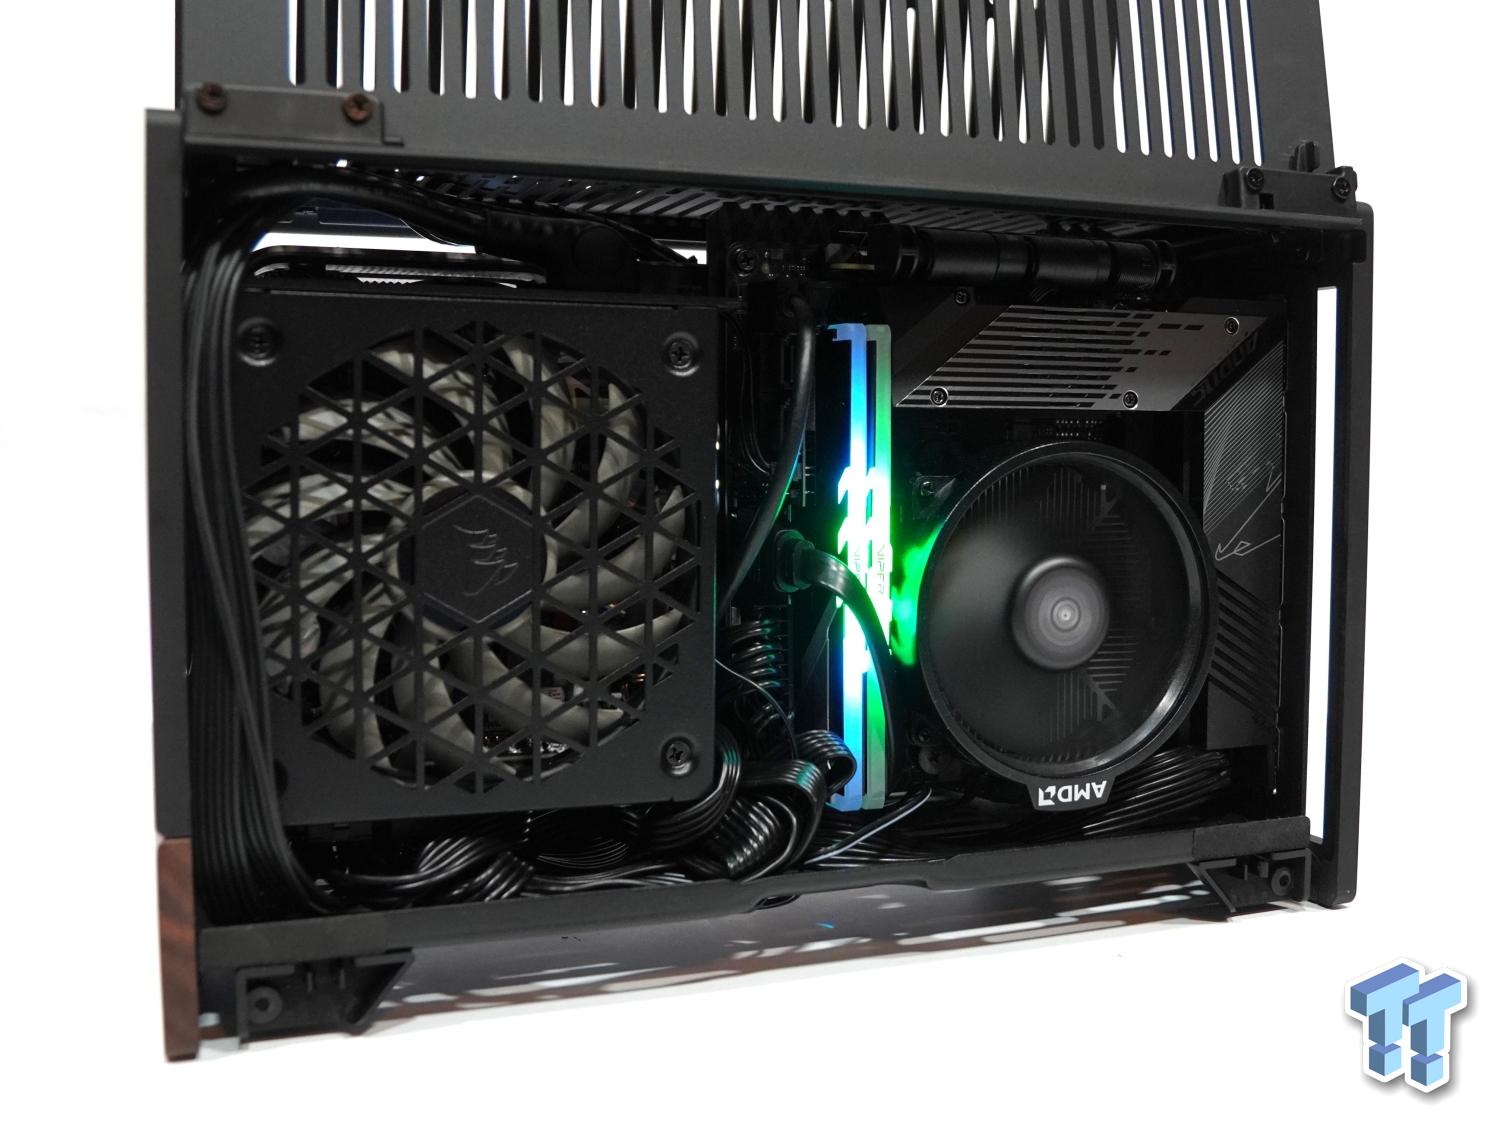 Fractal Design Terra Mini-ITX Case Review, Page 5 of 6